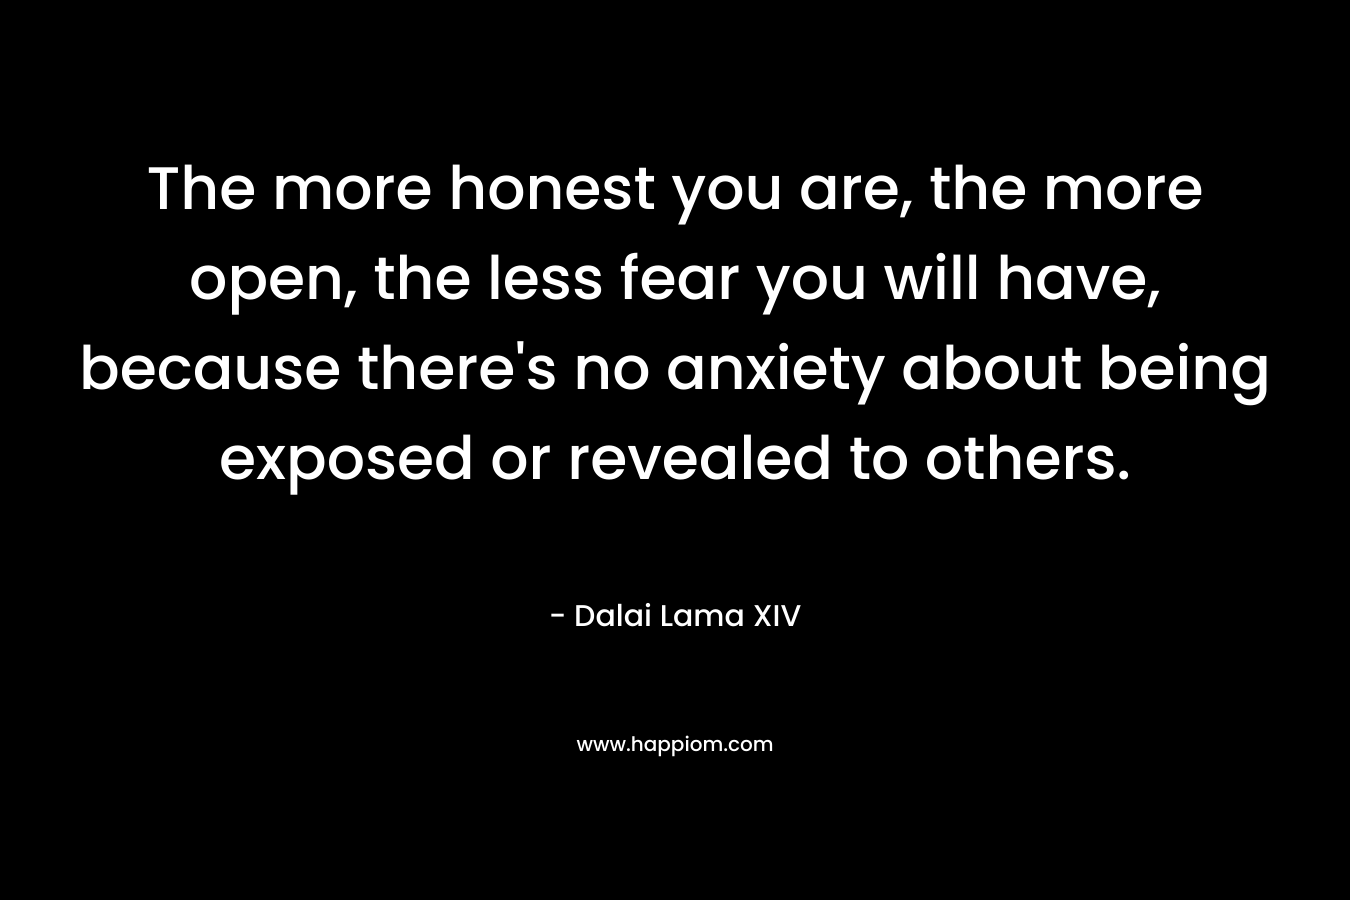 The more honest you are, the more open, the less fear you will have, because there's no anxiety about being exposed or revealed to others.